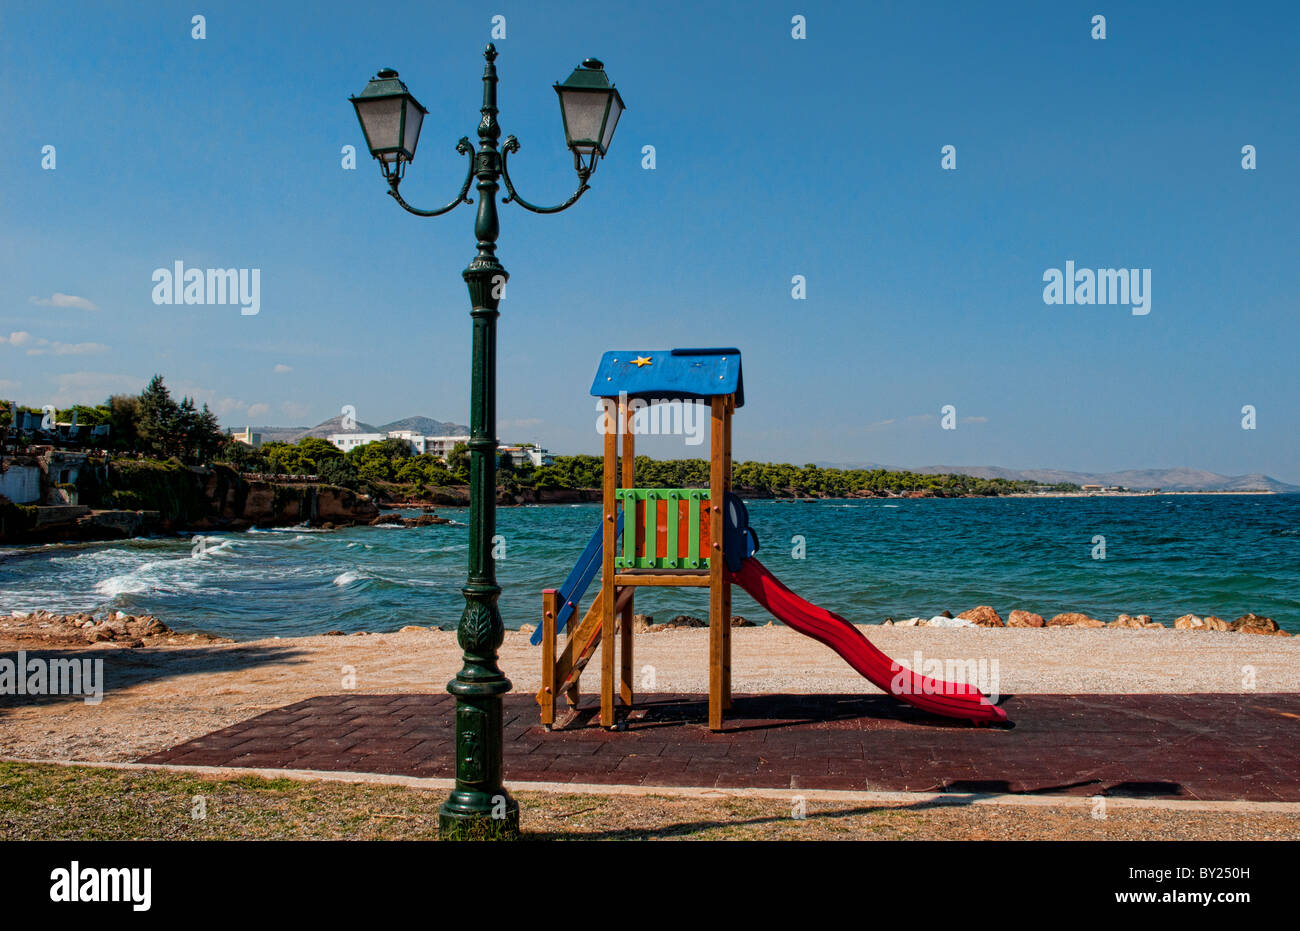 Mati Greece little park with colorful slide for children on beach resort  Stock Photo - Alamy